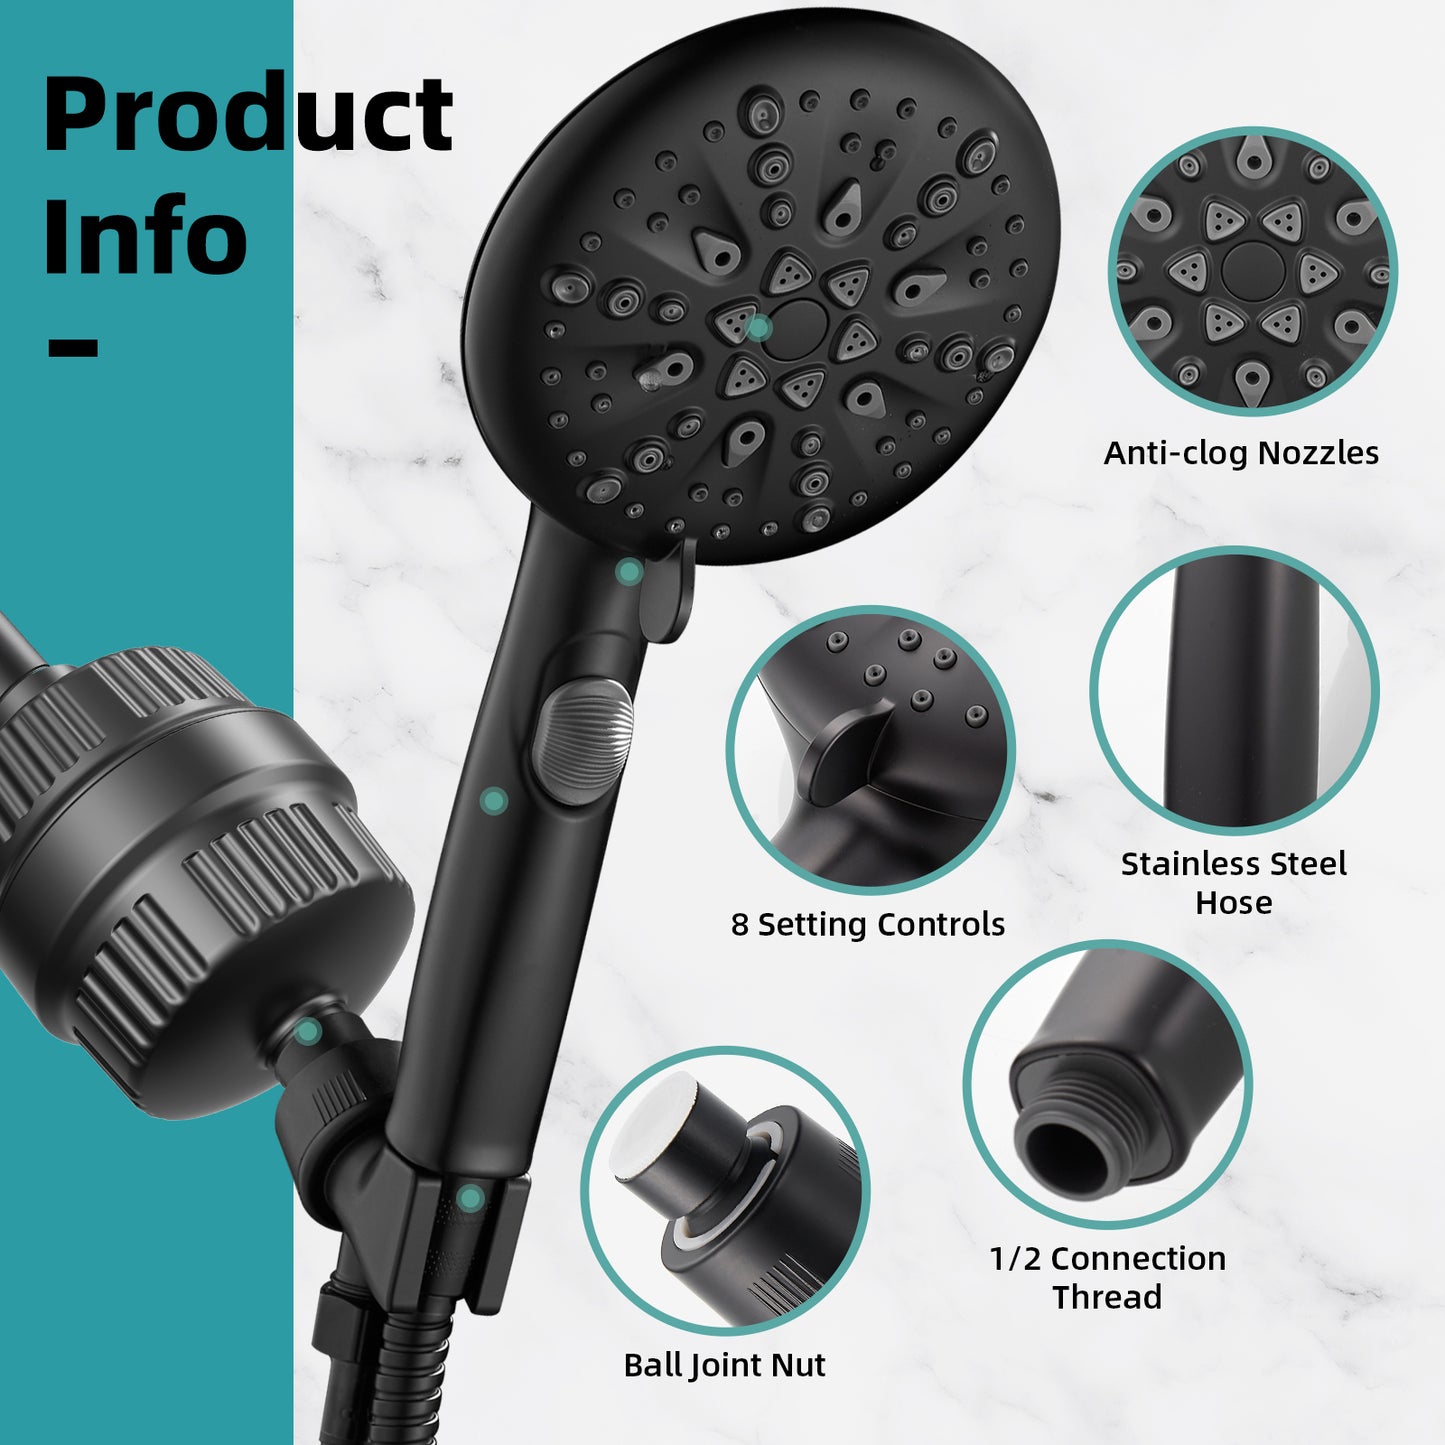 Cobbe High Pressure 9-Modes Filtered Shower Head - with 20 Stage Shower Filter for Hard Water, Removes Chlorine and Harmful Substances, Built-in Power Spray